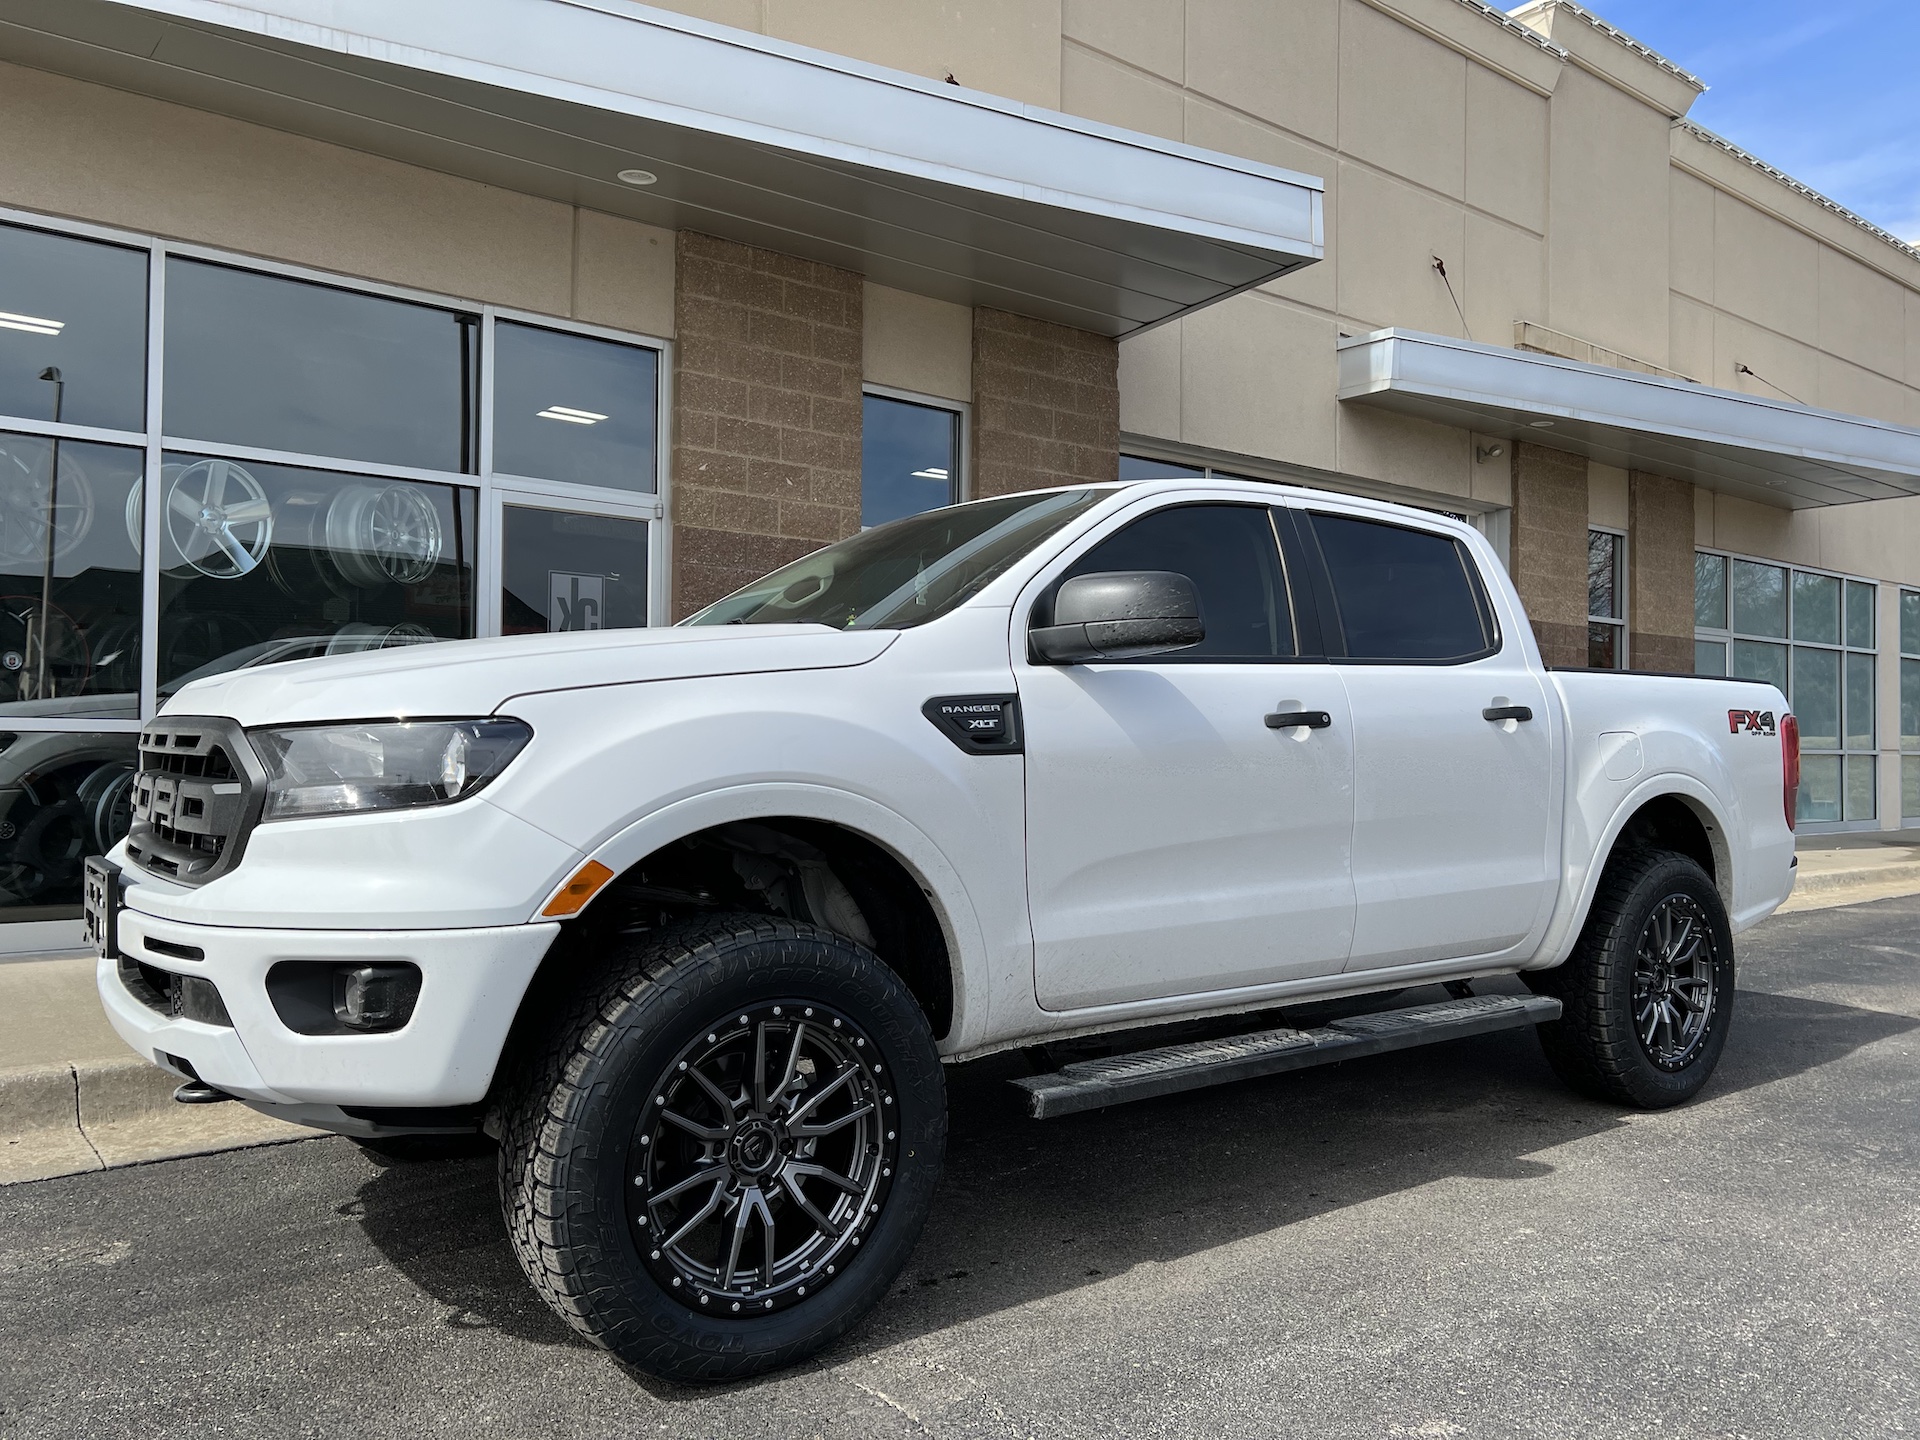  Ford Ranger with Fuel 1-Piece Wheels Rebel 6 - D680